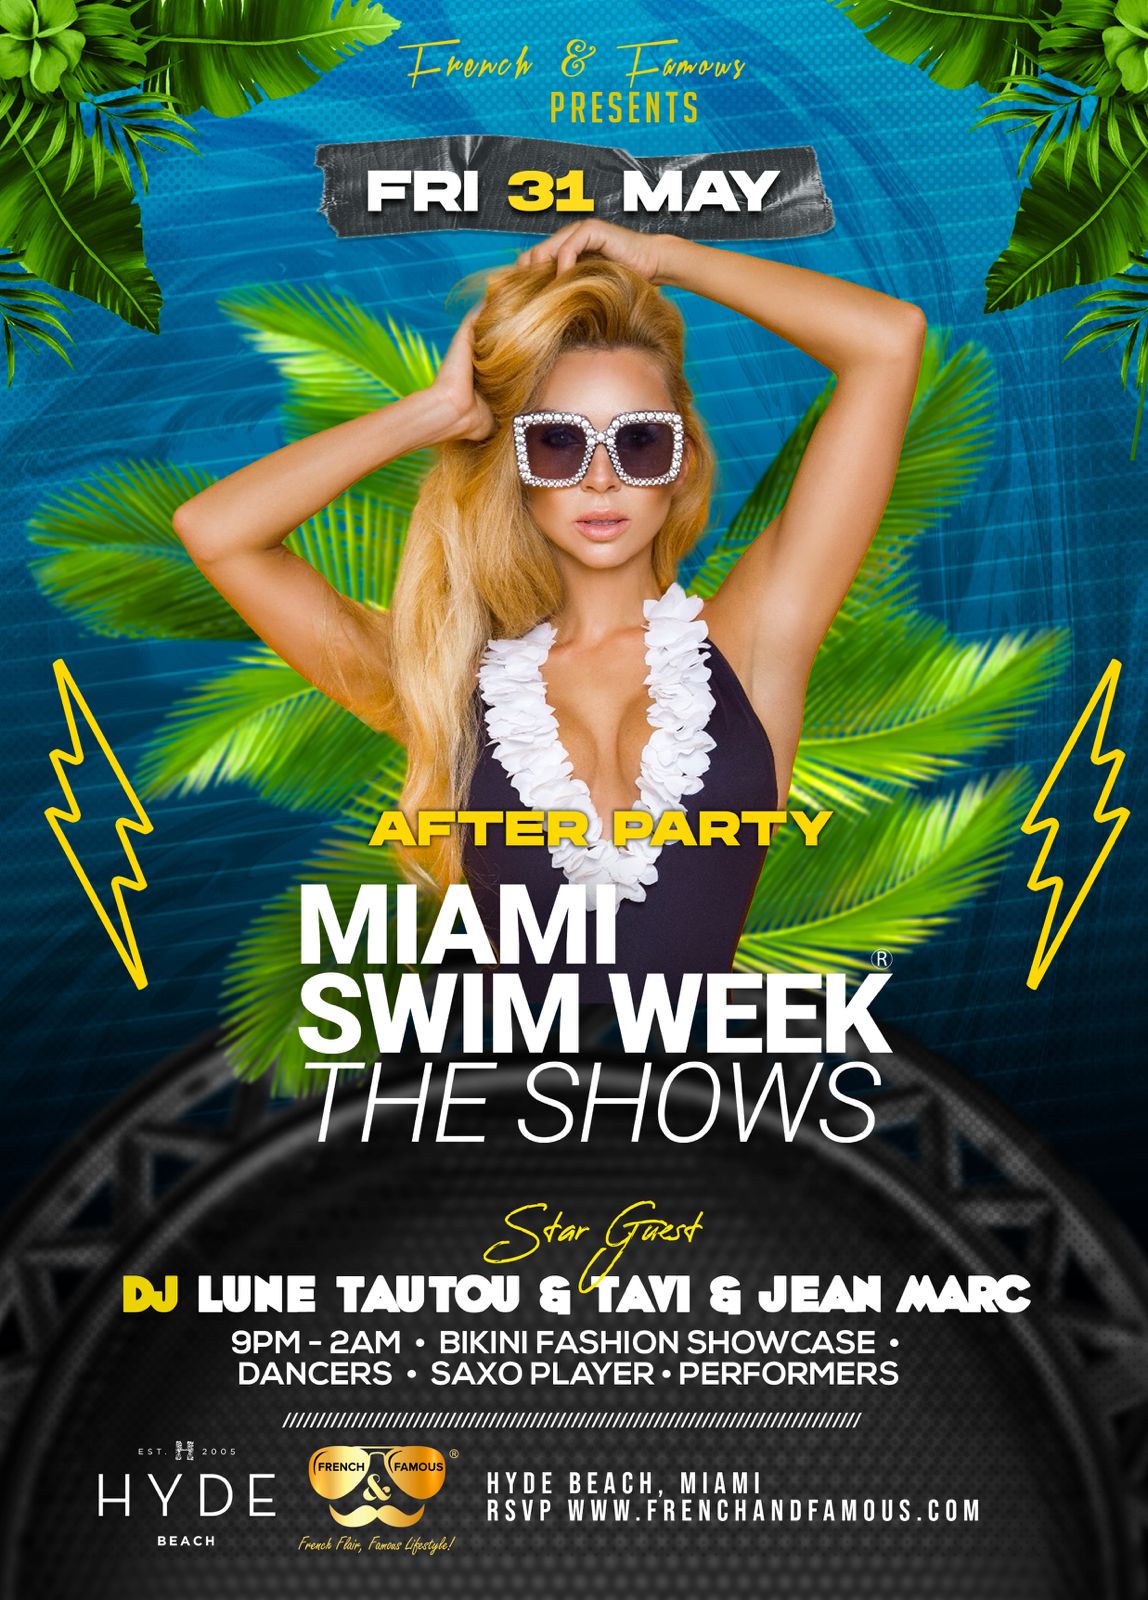 MIAMI SWIM WEEK OFFICIAL AFTERPARTY